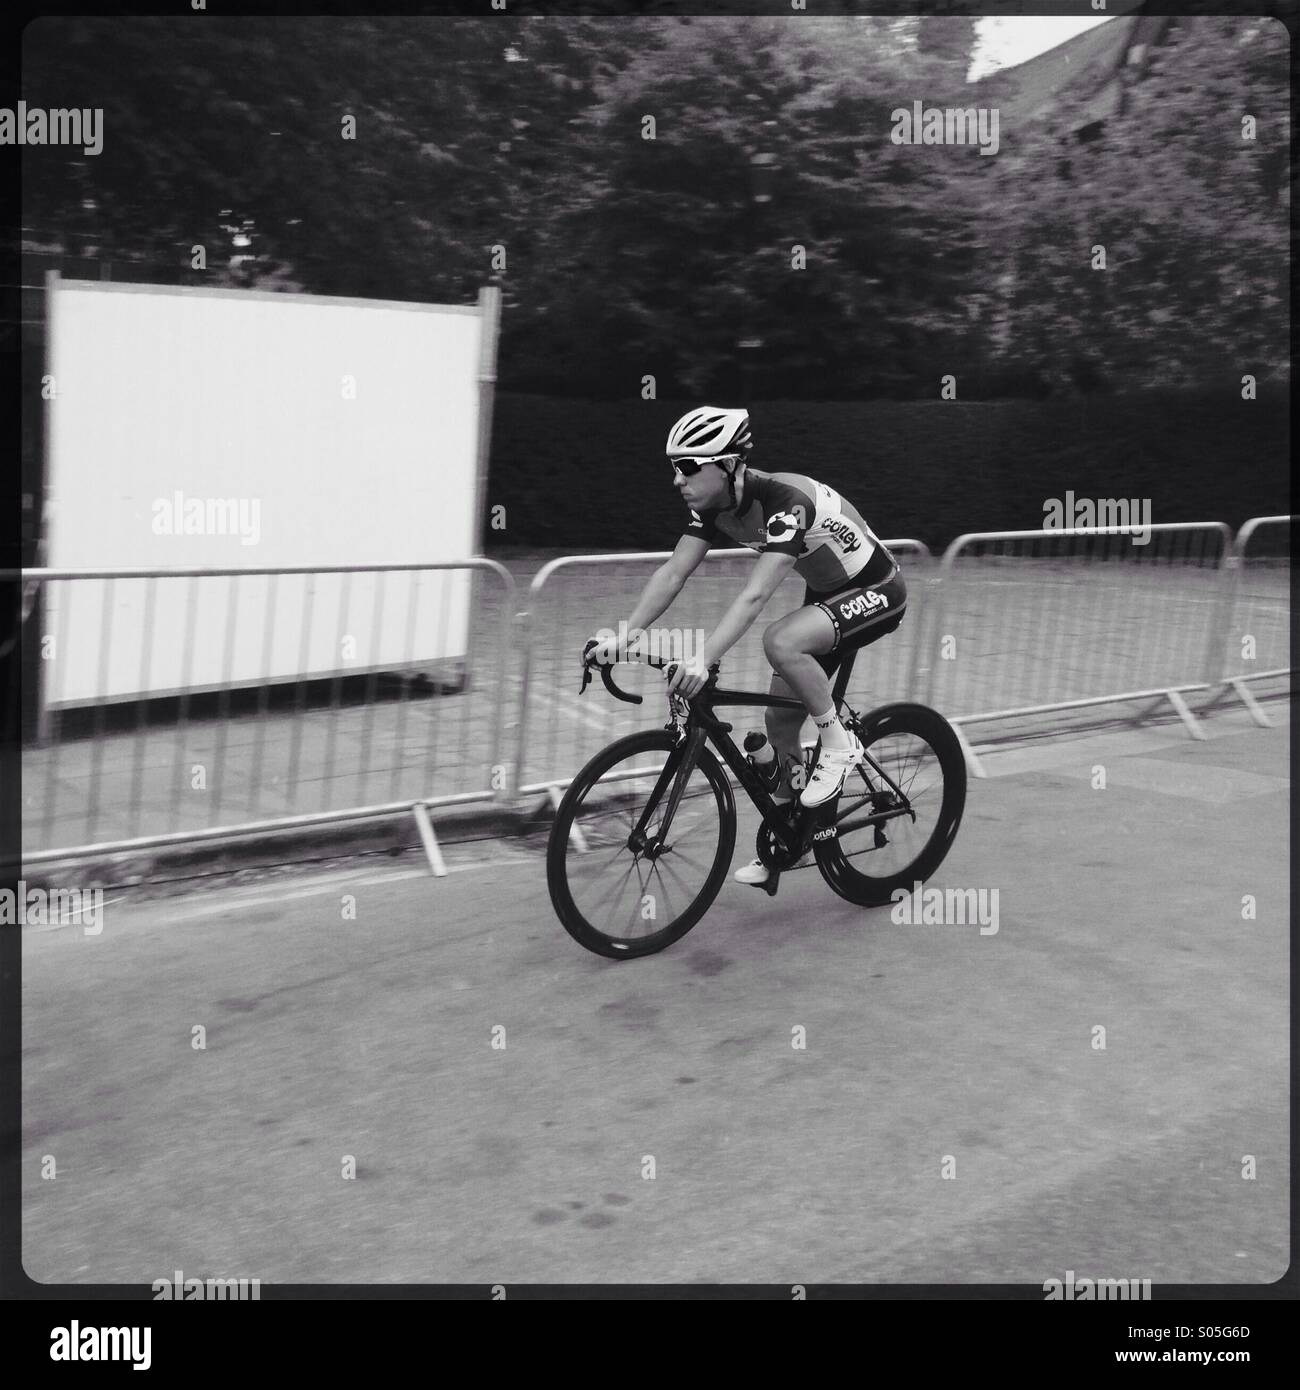 Competitor in a cycling road race (criterium). Stock Photo